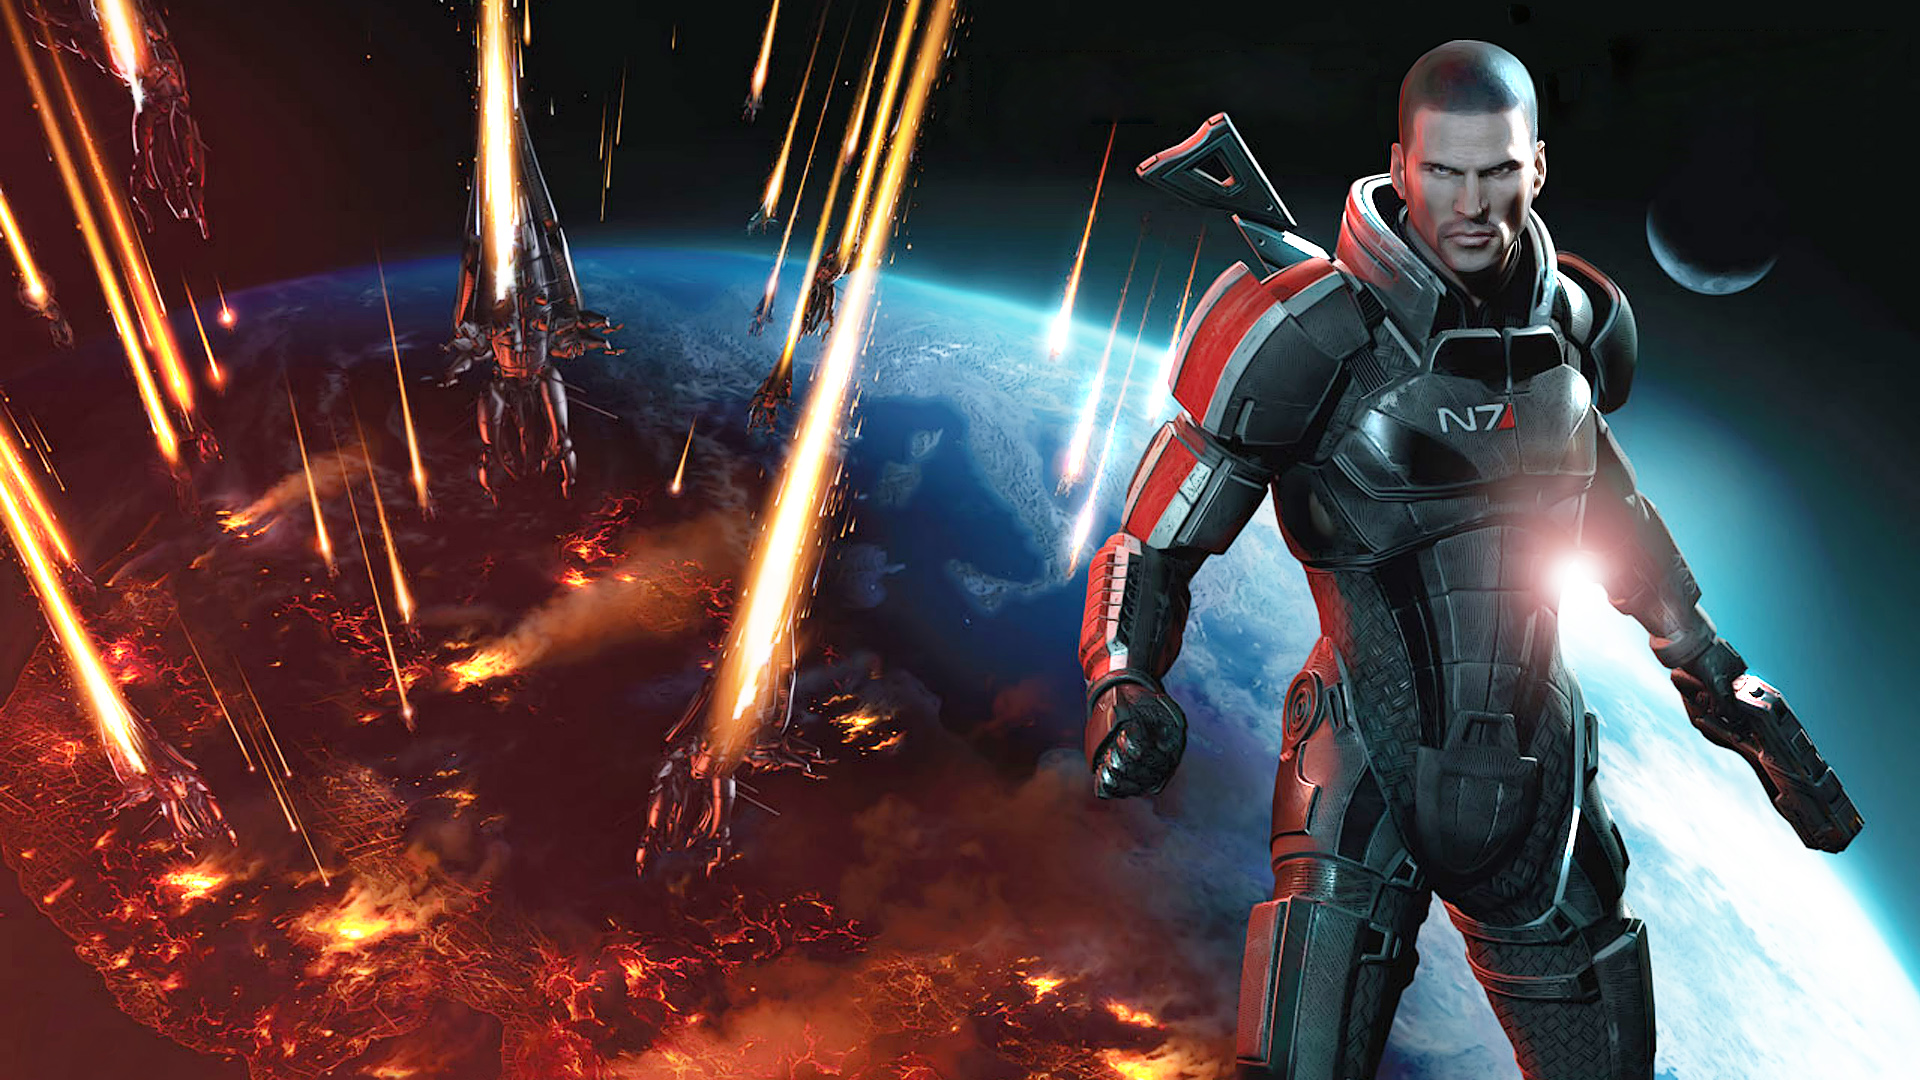 mass effect wallpaper android,action adventure game,pc game,superhero,fictional character,action film